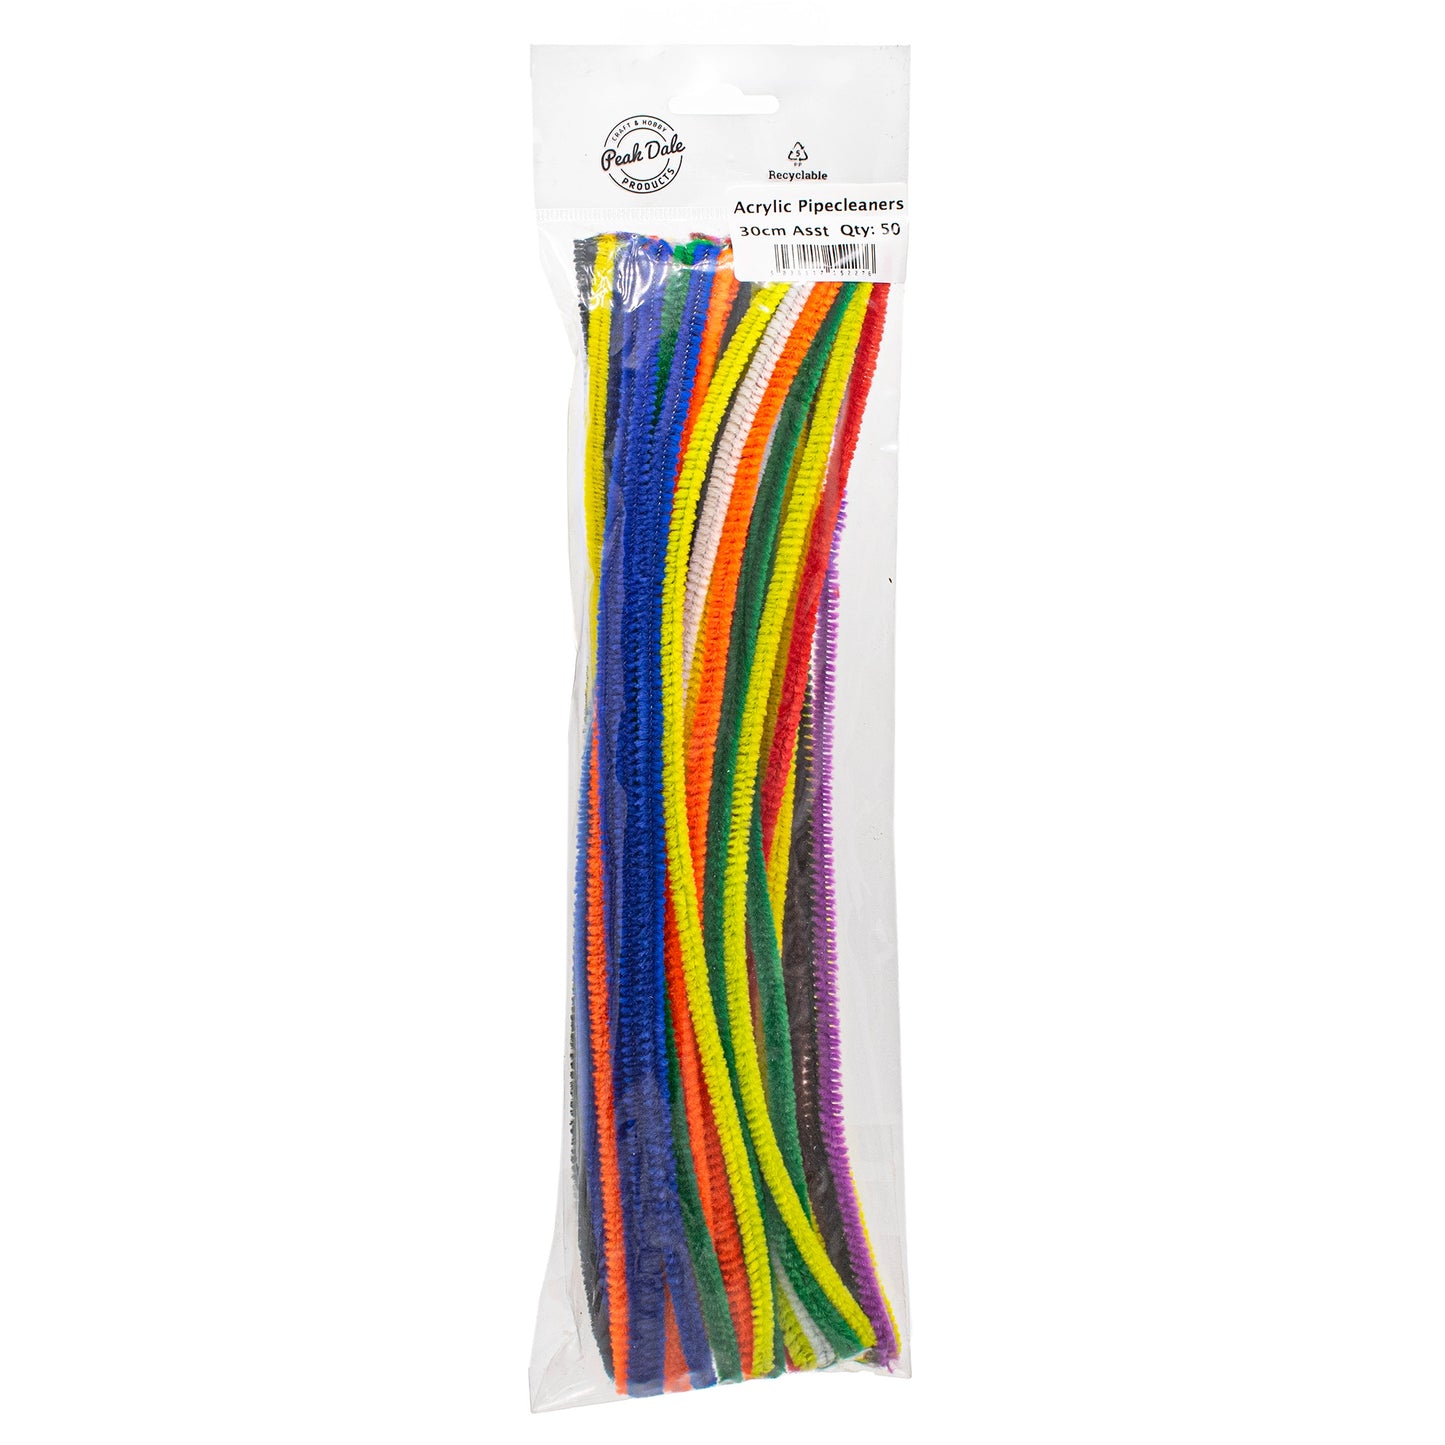 Acrylic Pipecleaners 30cm Asst pack 50 - Default (PIPSTAST30)